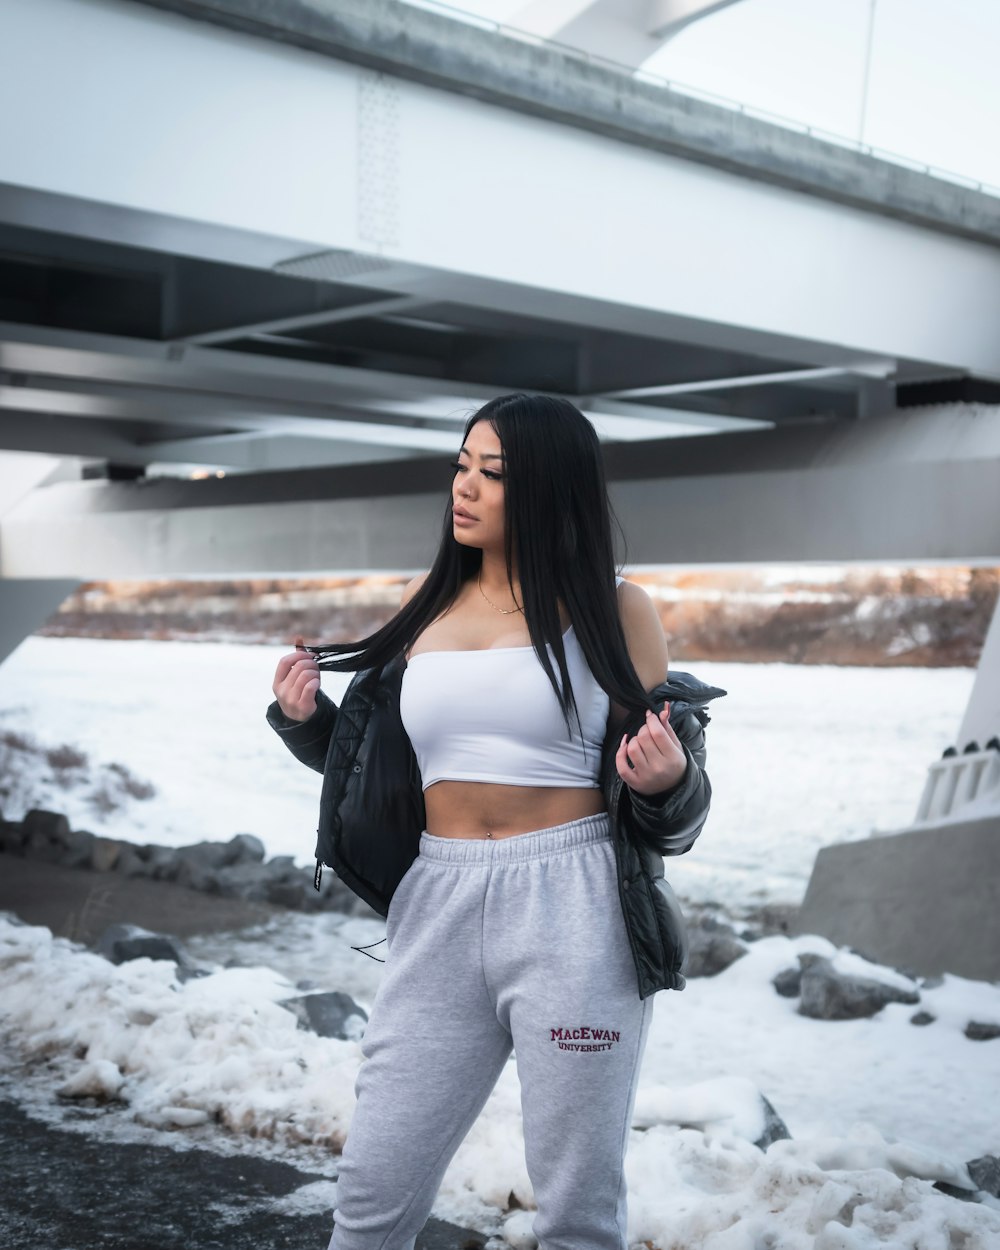 woman in black tank top and gray pants standing on snow covered ground during daytime